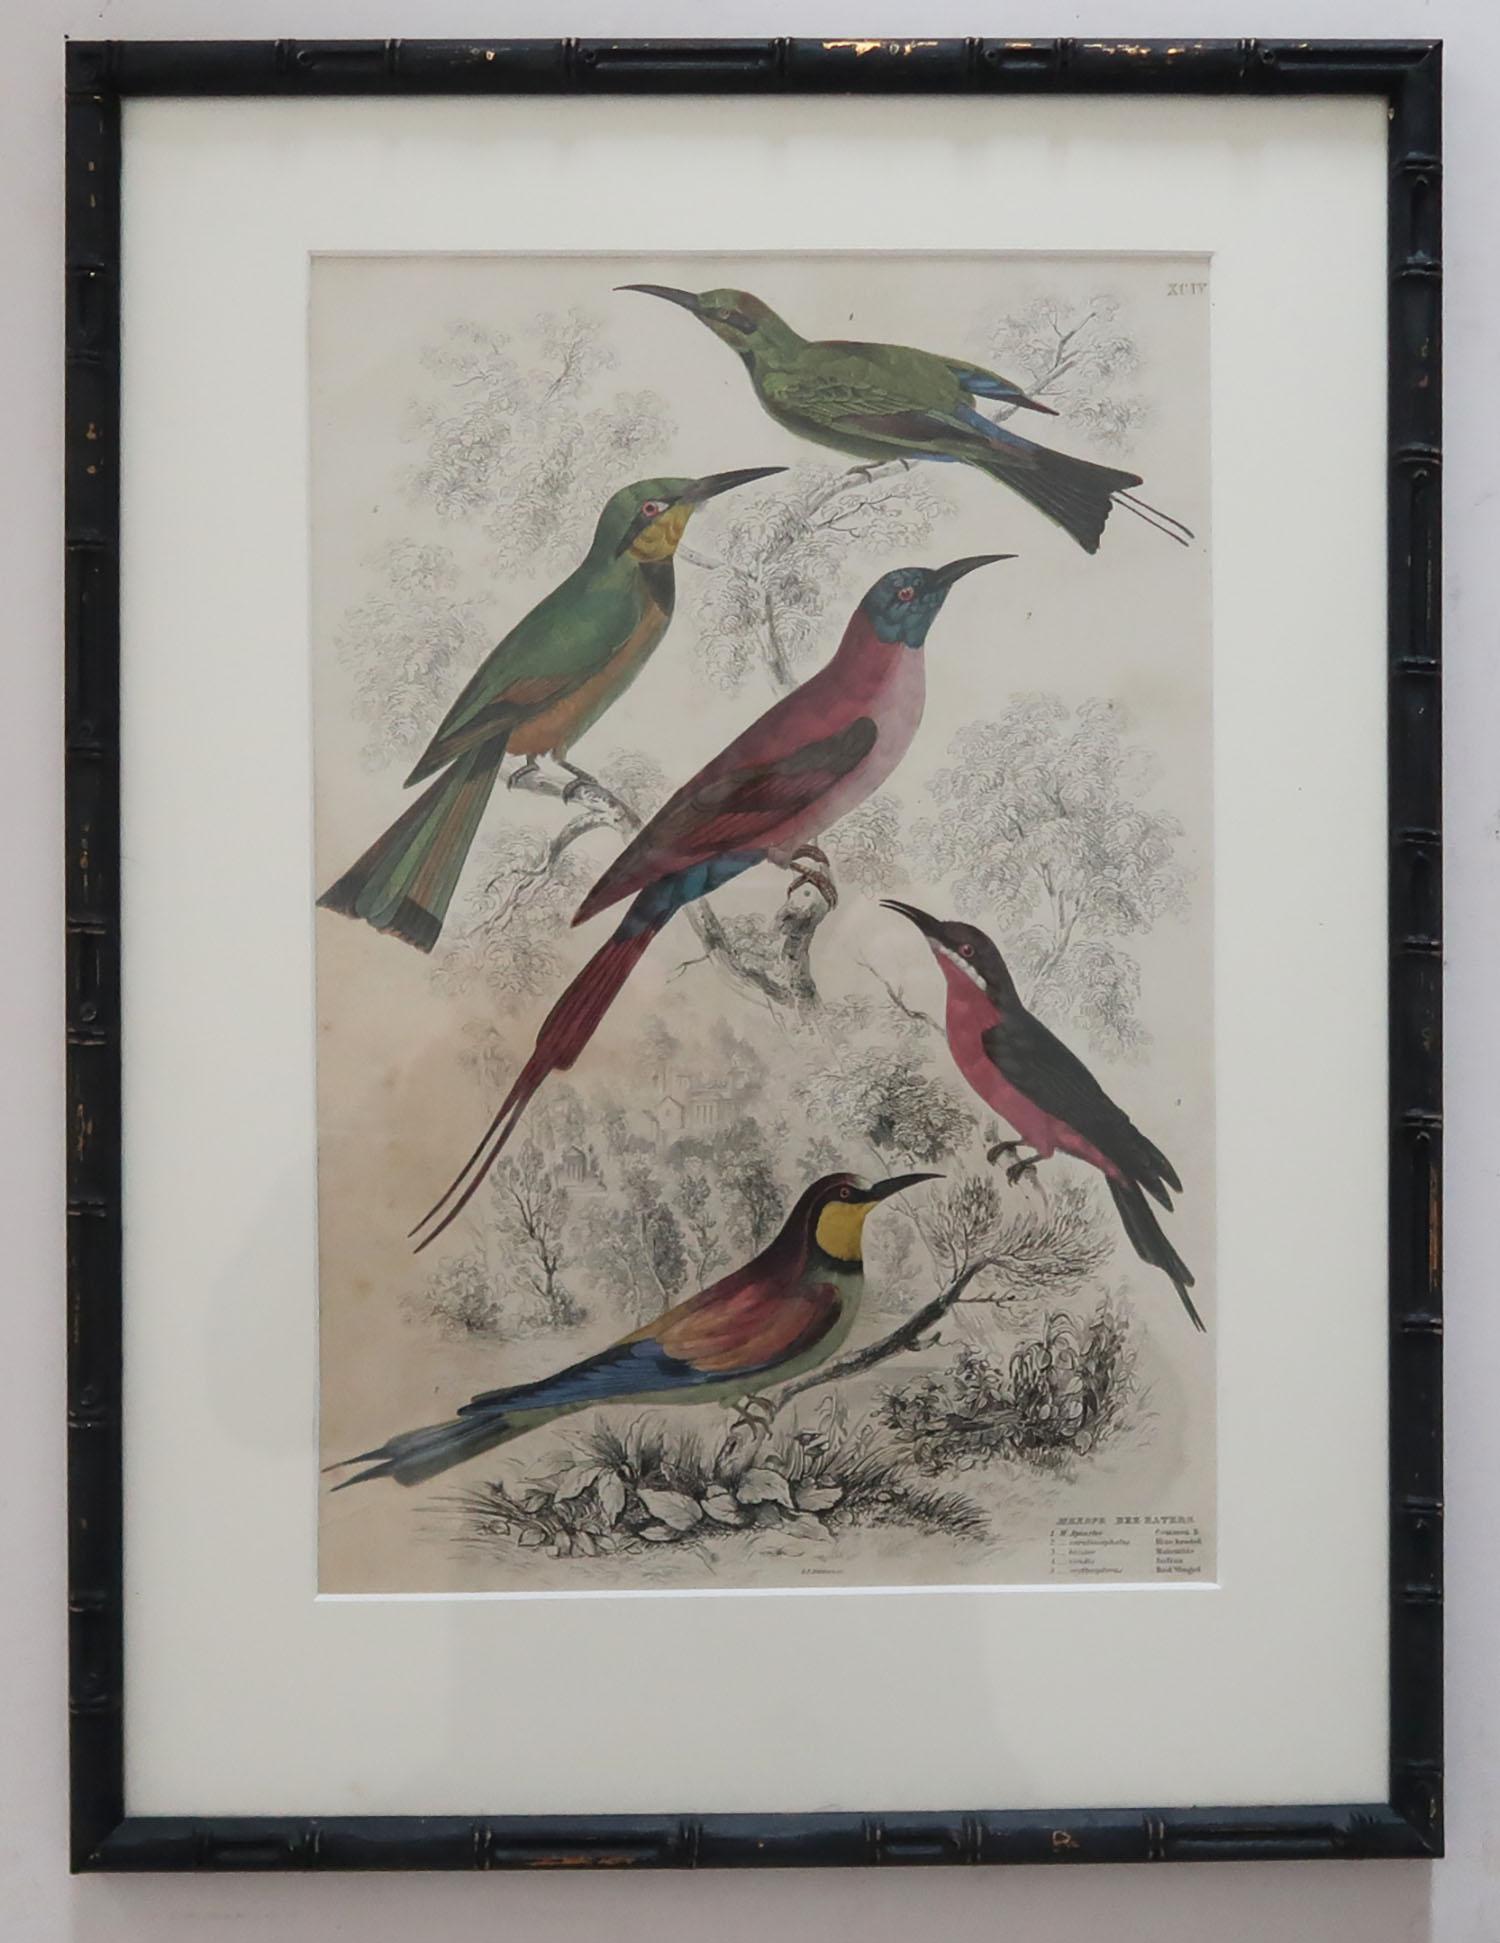 Chinoiserie Set of 15 Antique Bird Prints in Faux Bamboo Frames, 1830s